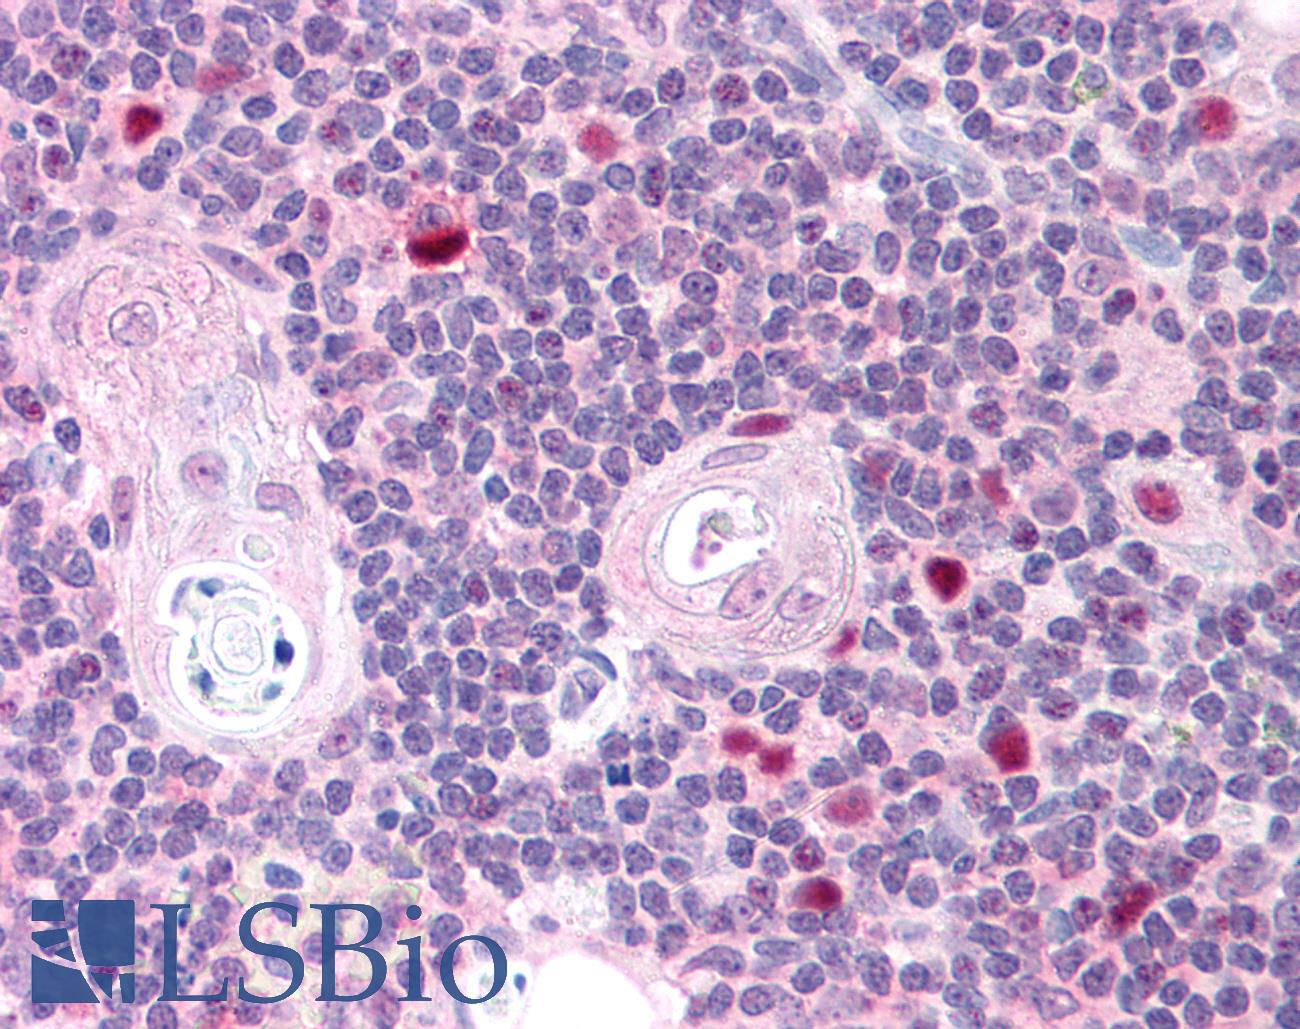 AIRE Antibody - Anti-AIRE antibody IHC of human thymus. Immunohistochemistry of formalin-fixed, paraffin-embedded tissue after heat-induced antigen retrieval. Antibody concentration 5 ug/ml.